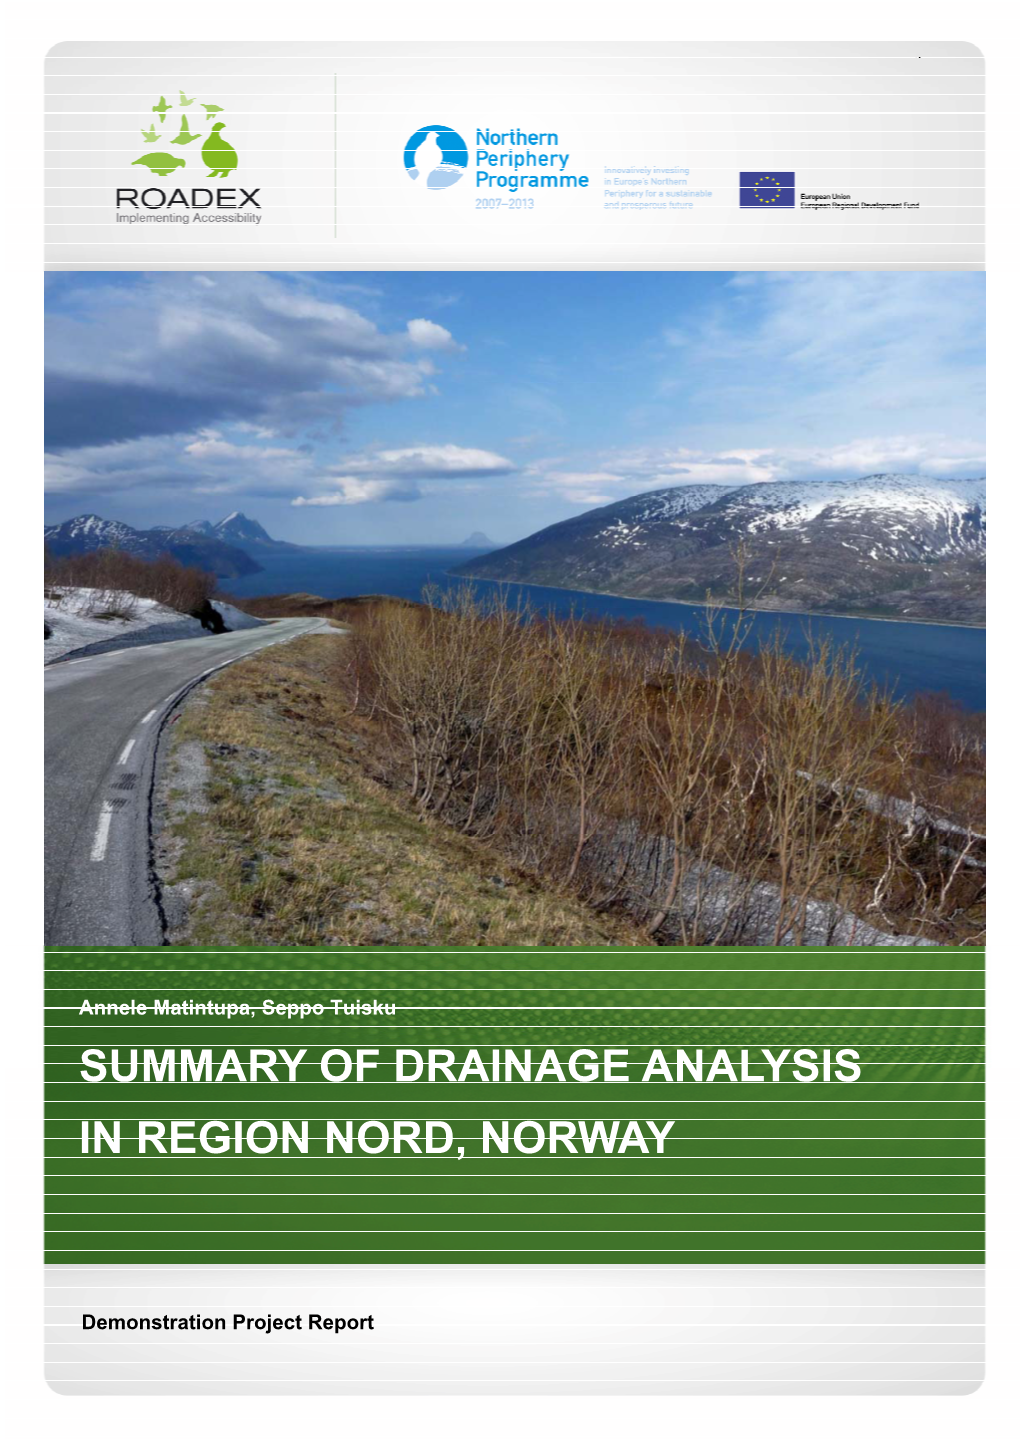 Summary of Drainage Analysis in Region Nord, Norway